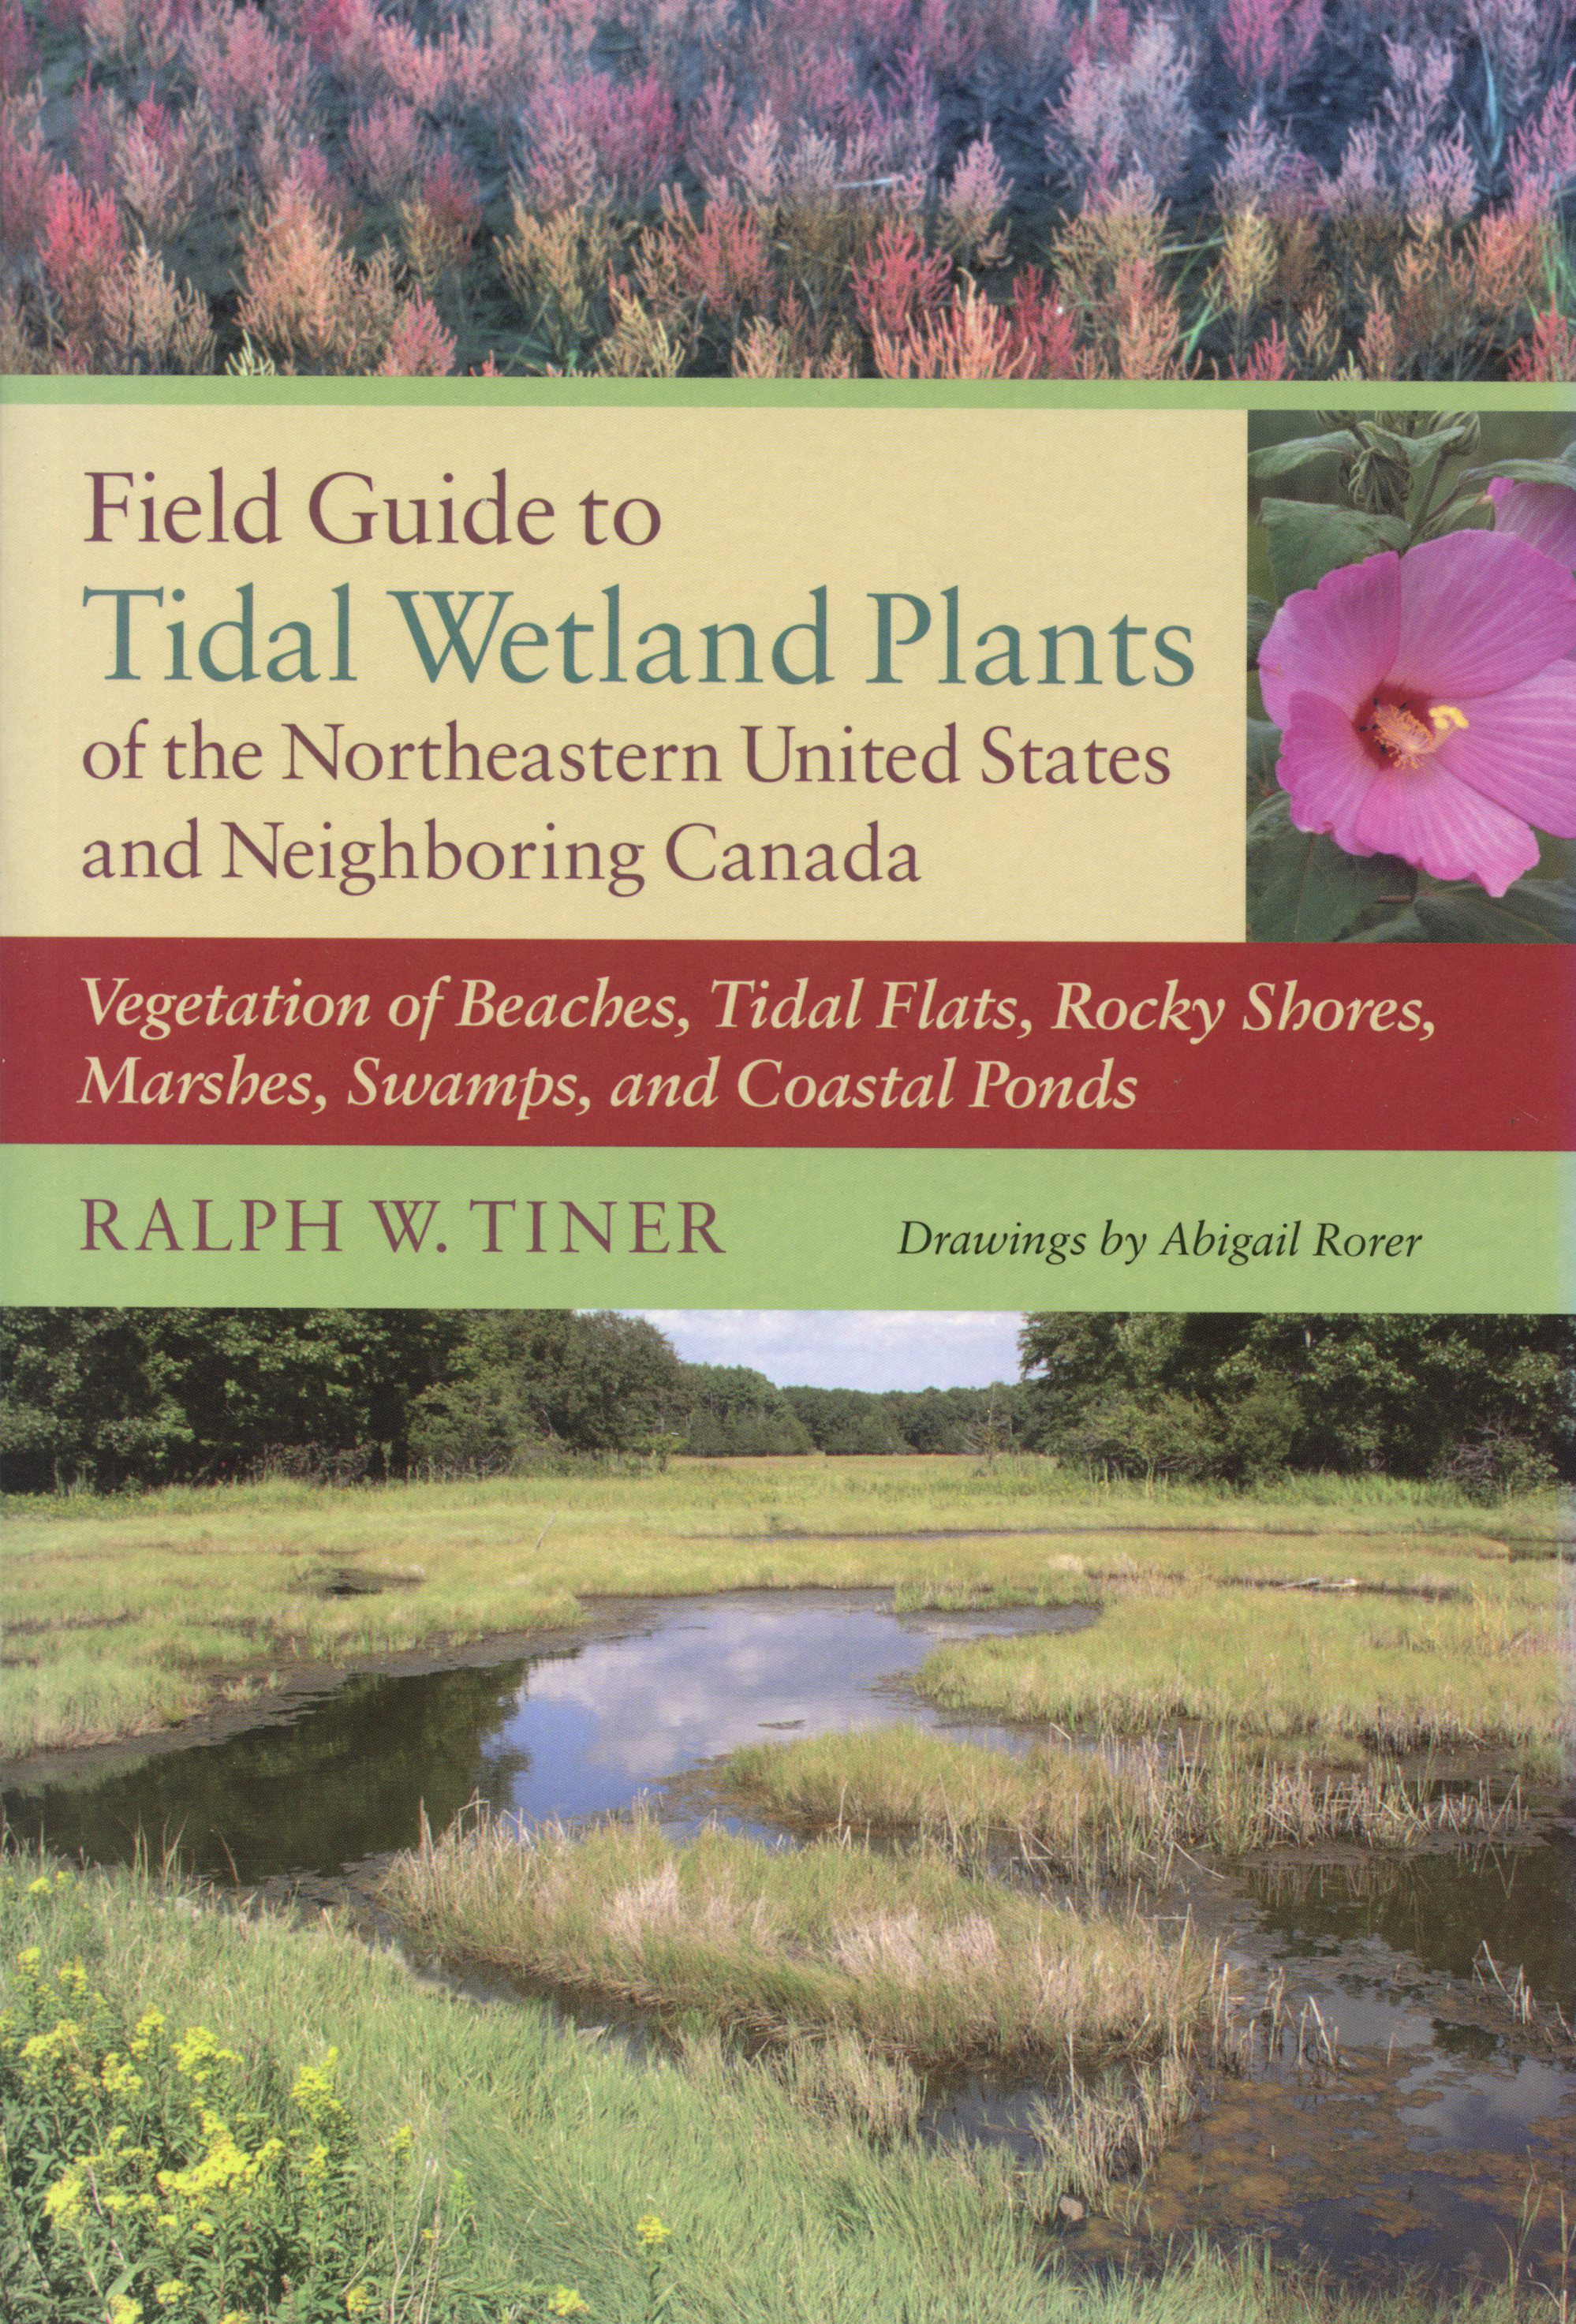 Field Guide to Tidal Wetland Plants of the Northeastern United